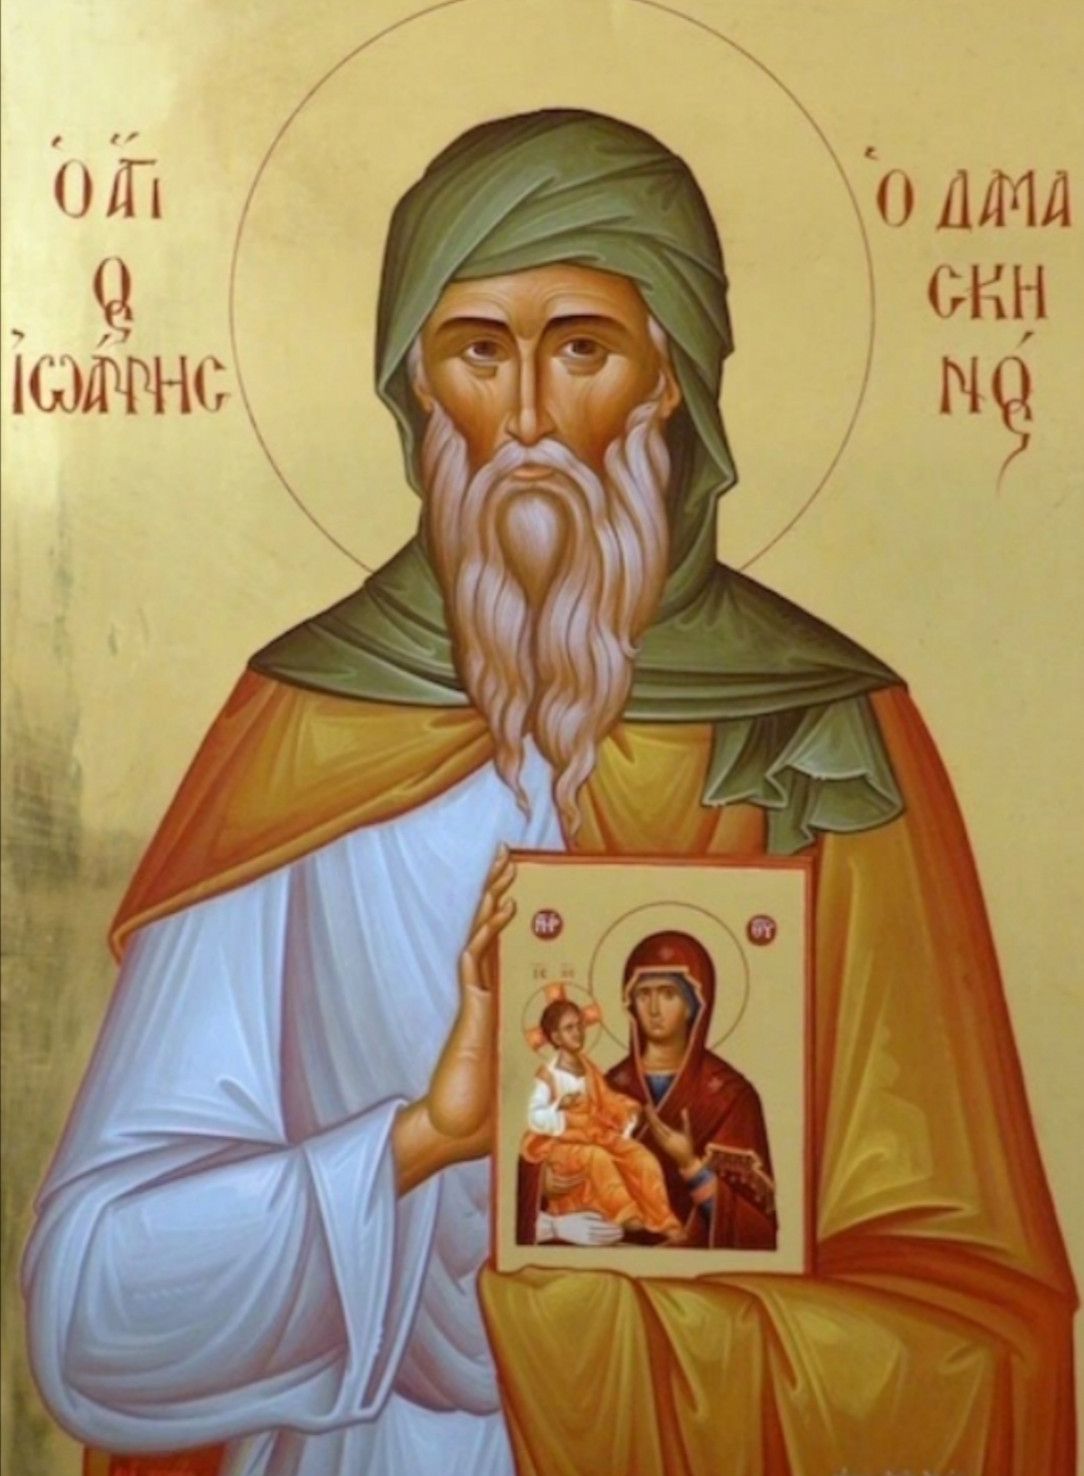 4th of December is the fiest of Saint John of Damascus